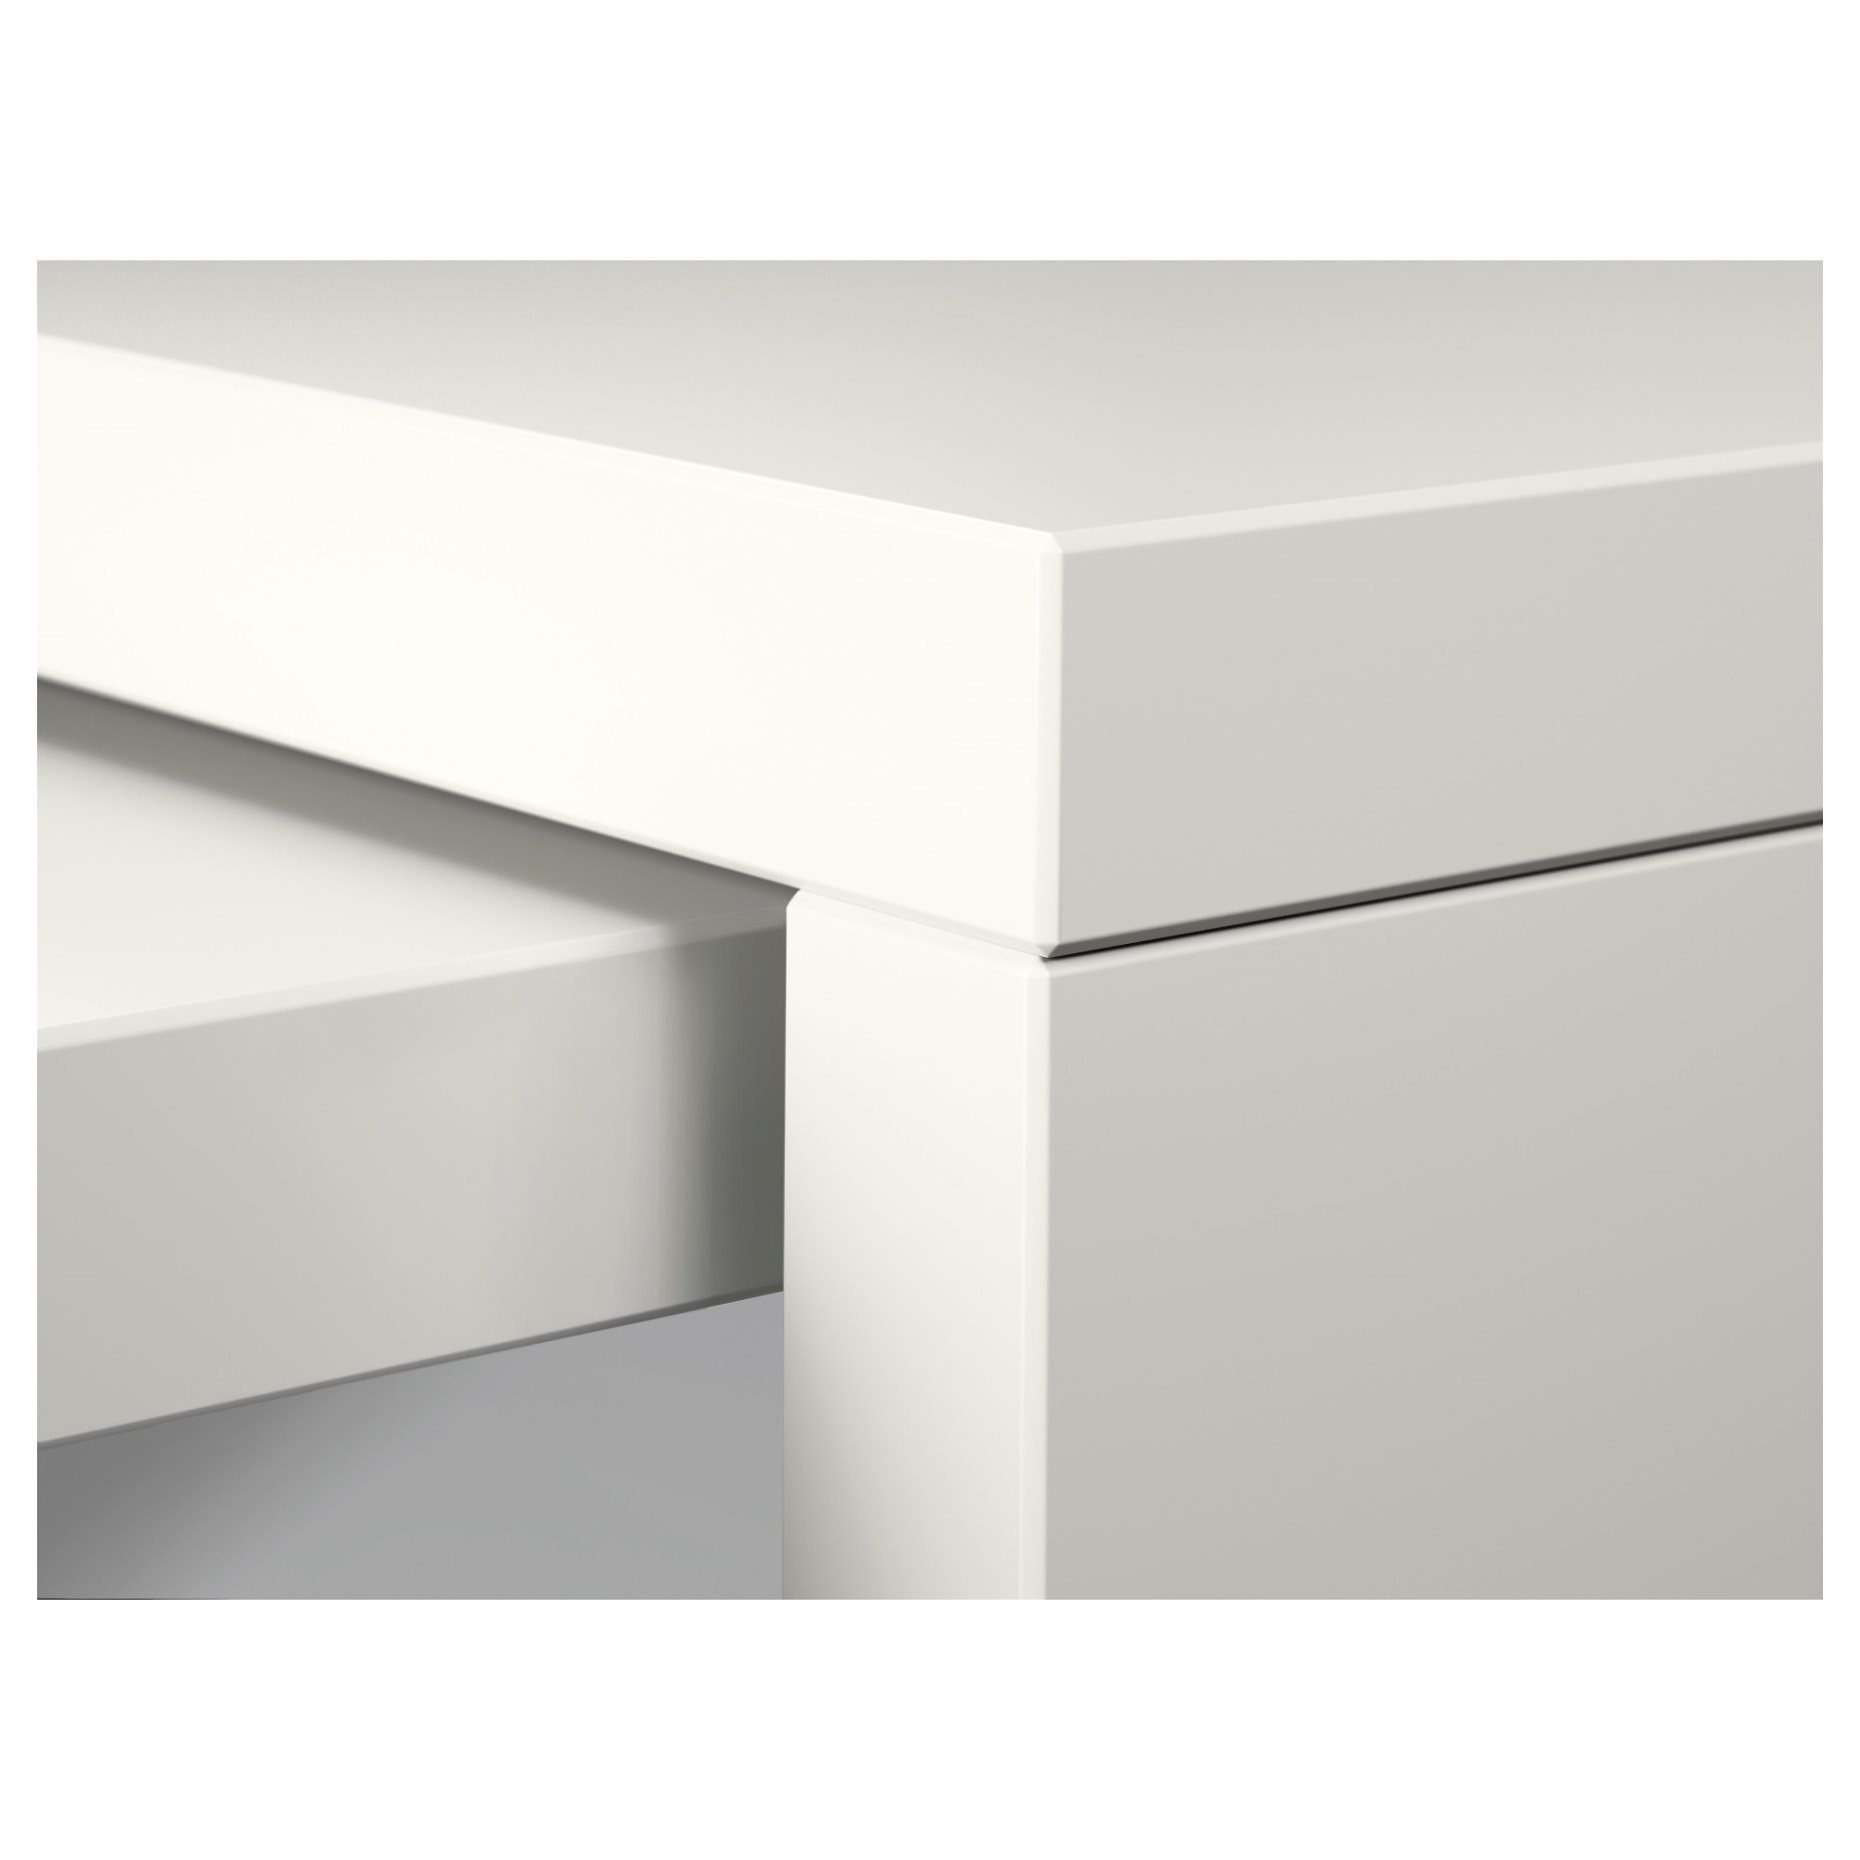 MALM, desk with pull-out panel, 702.141.92